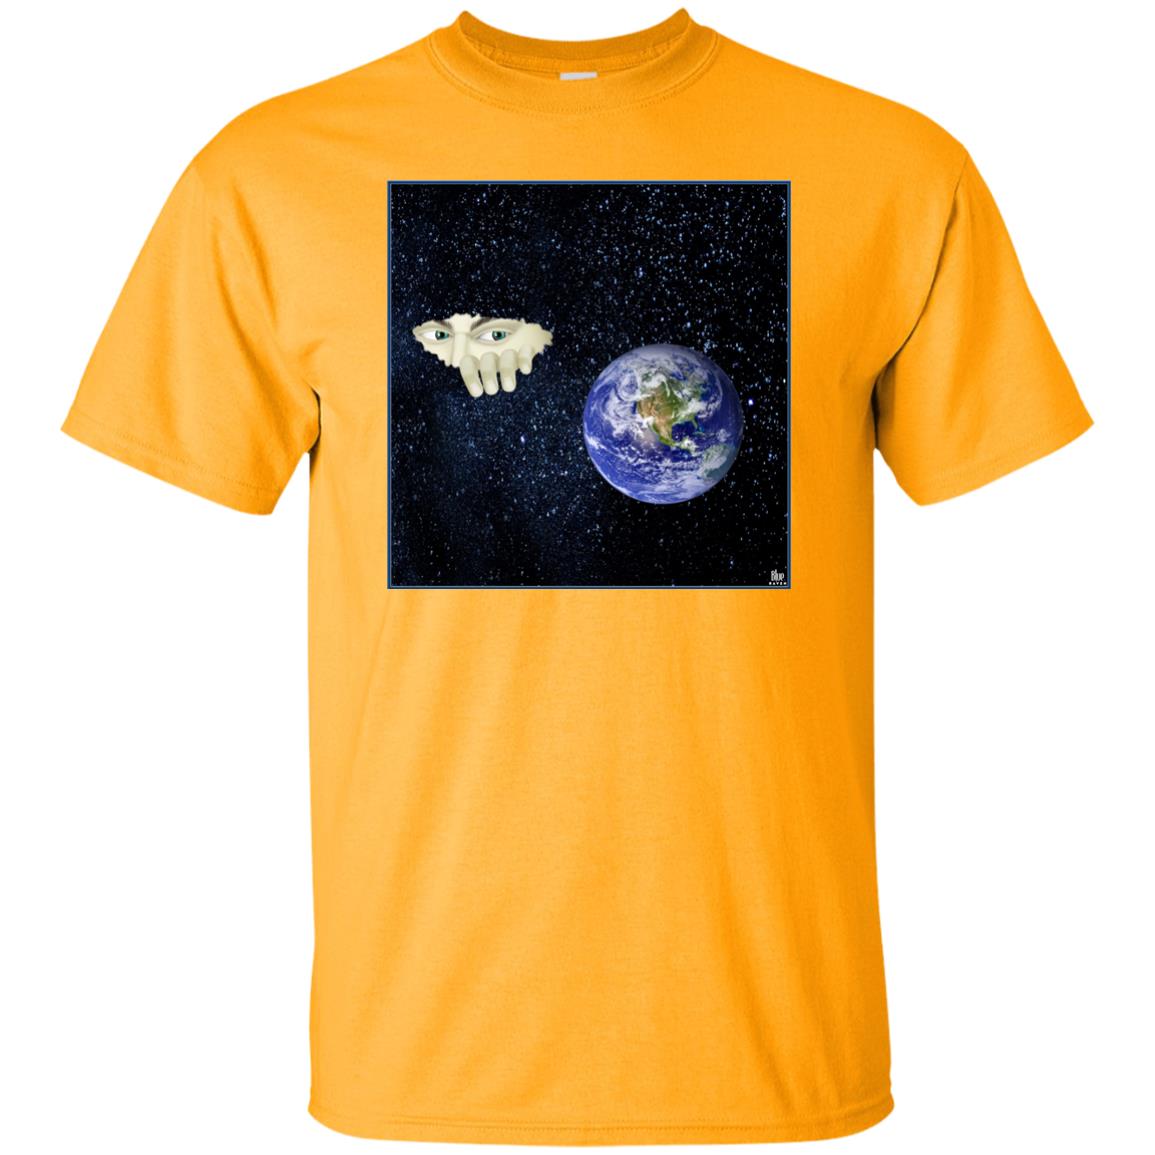 SOMEWHERE OUT THERE - Men's Classic Fit T-Shirt